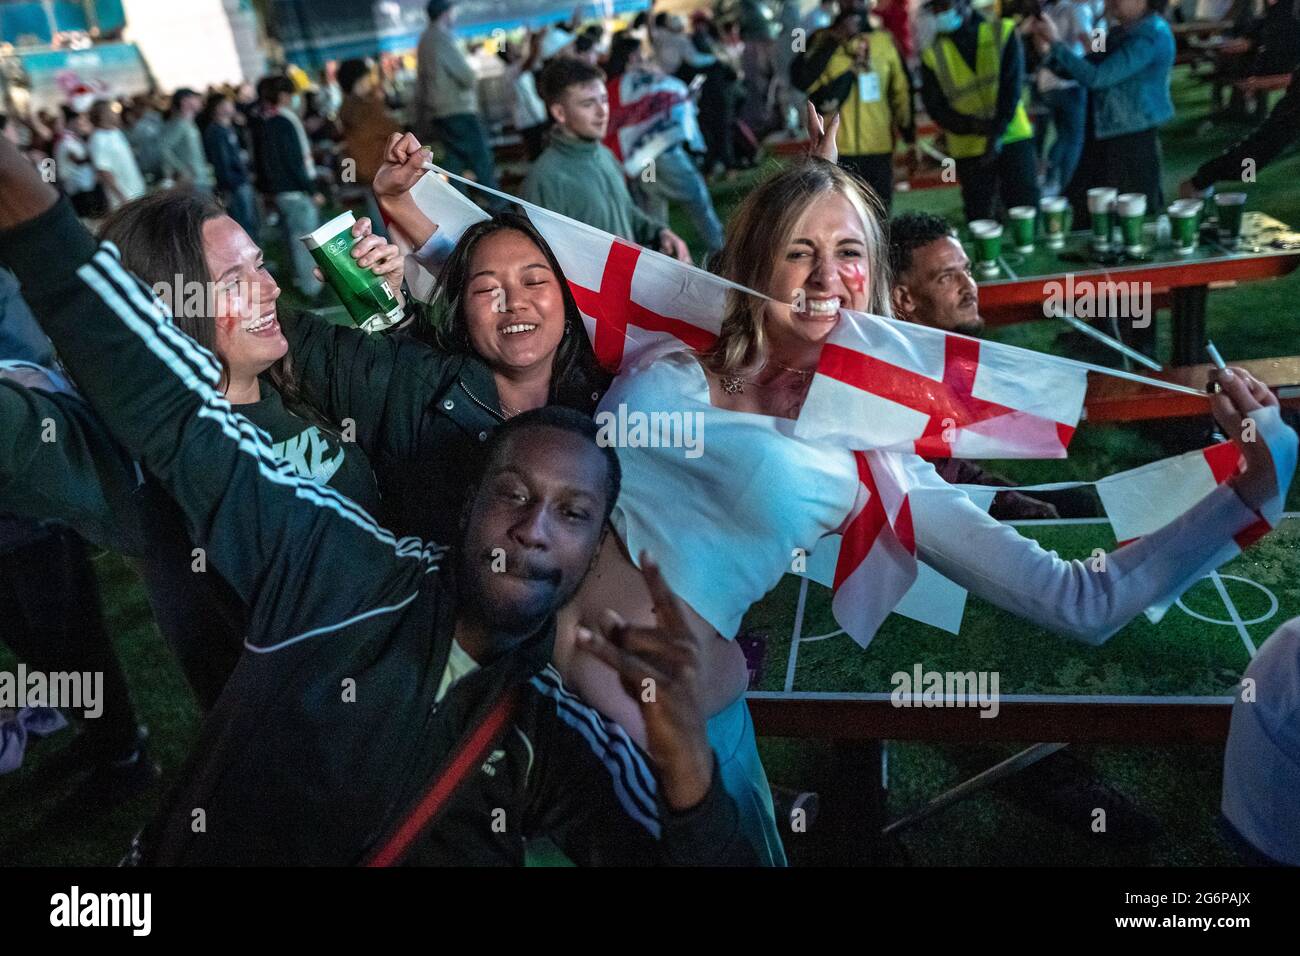 London, UK. 7th July, 2021. UEFA EURO 2020: England fans celebrate in Trafalgar Square as England wins 2-1 in extra time against Denmark in the semi-finals. Credit: Guy Corbishley/Alamy Live News Stock Photo